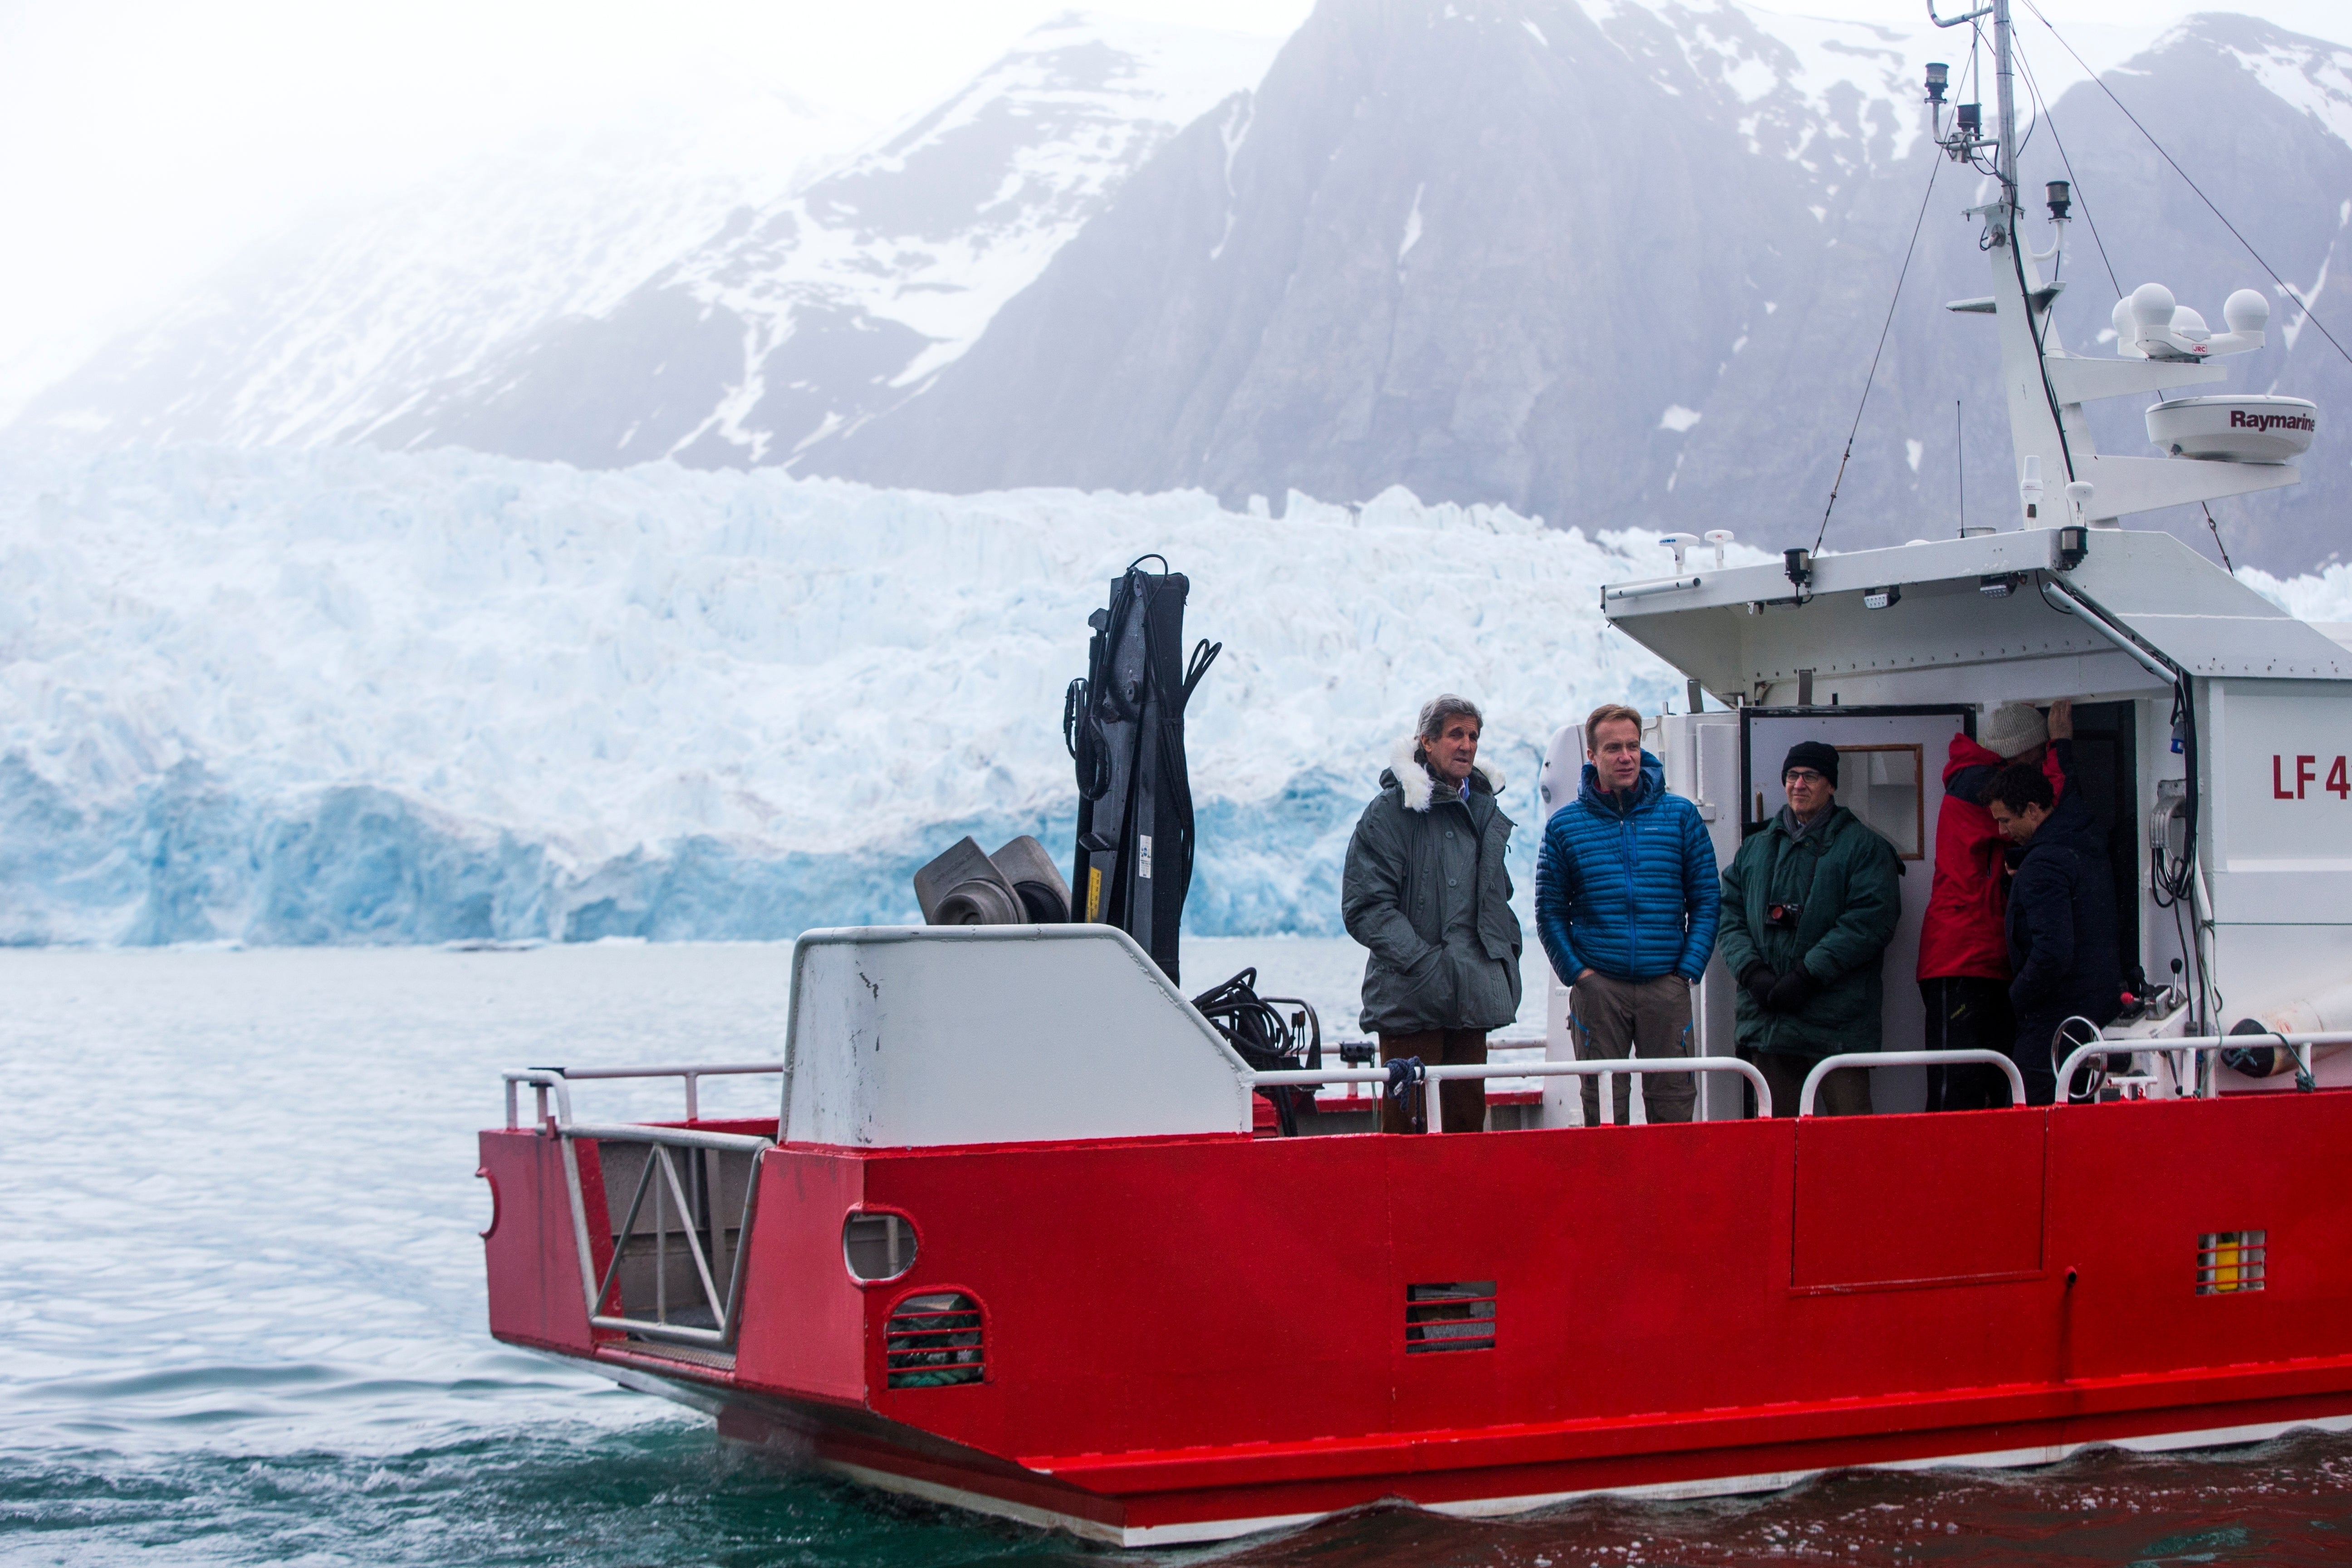 U.S. Secretary of State John Kerry and Norwegian Foreign Minister Borge Brende tour the Blomstrand Glacier, June 16, 2016, in Ny-Alesund, Norway. Kerry visited to view areas impacted by climate change with melting ice and the opening of new sea lanes